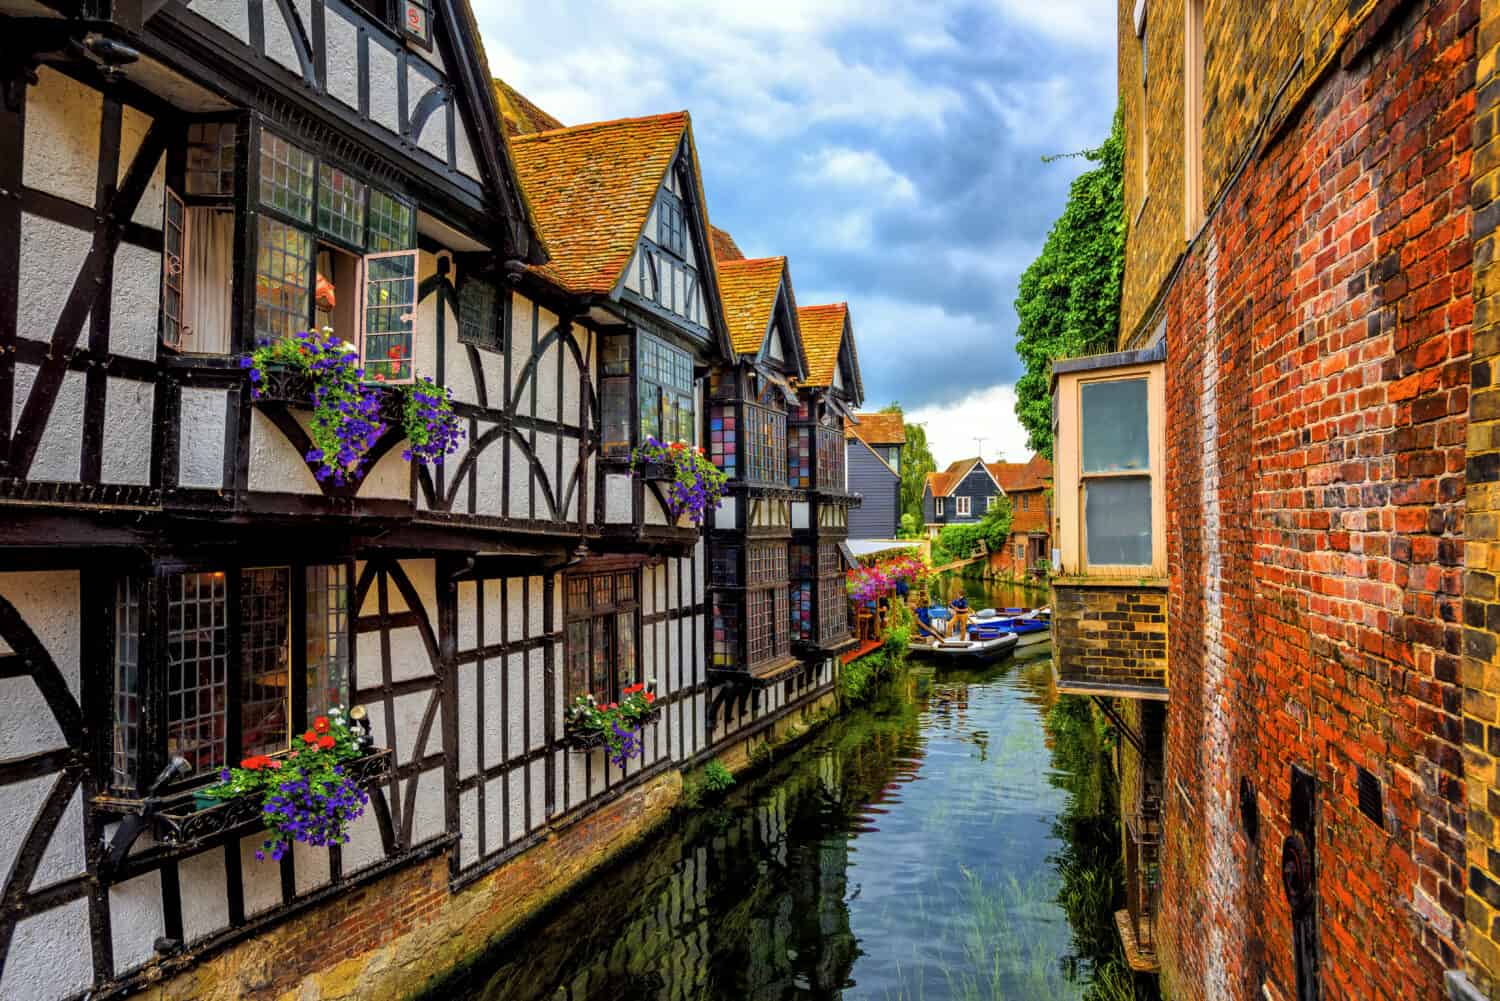 Medieval half-timber houses and Stour river in Canterbury Old Town, Kent, England